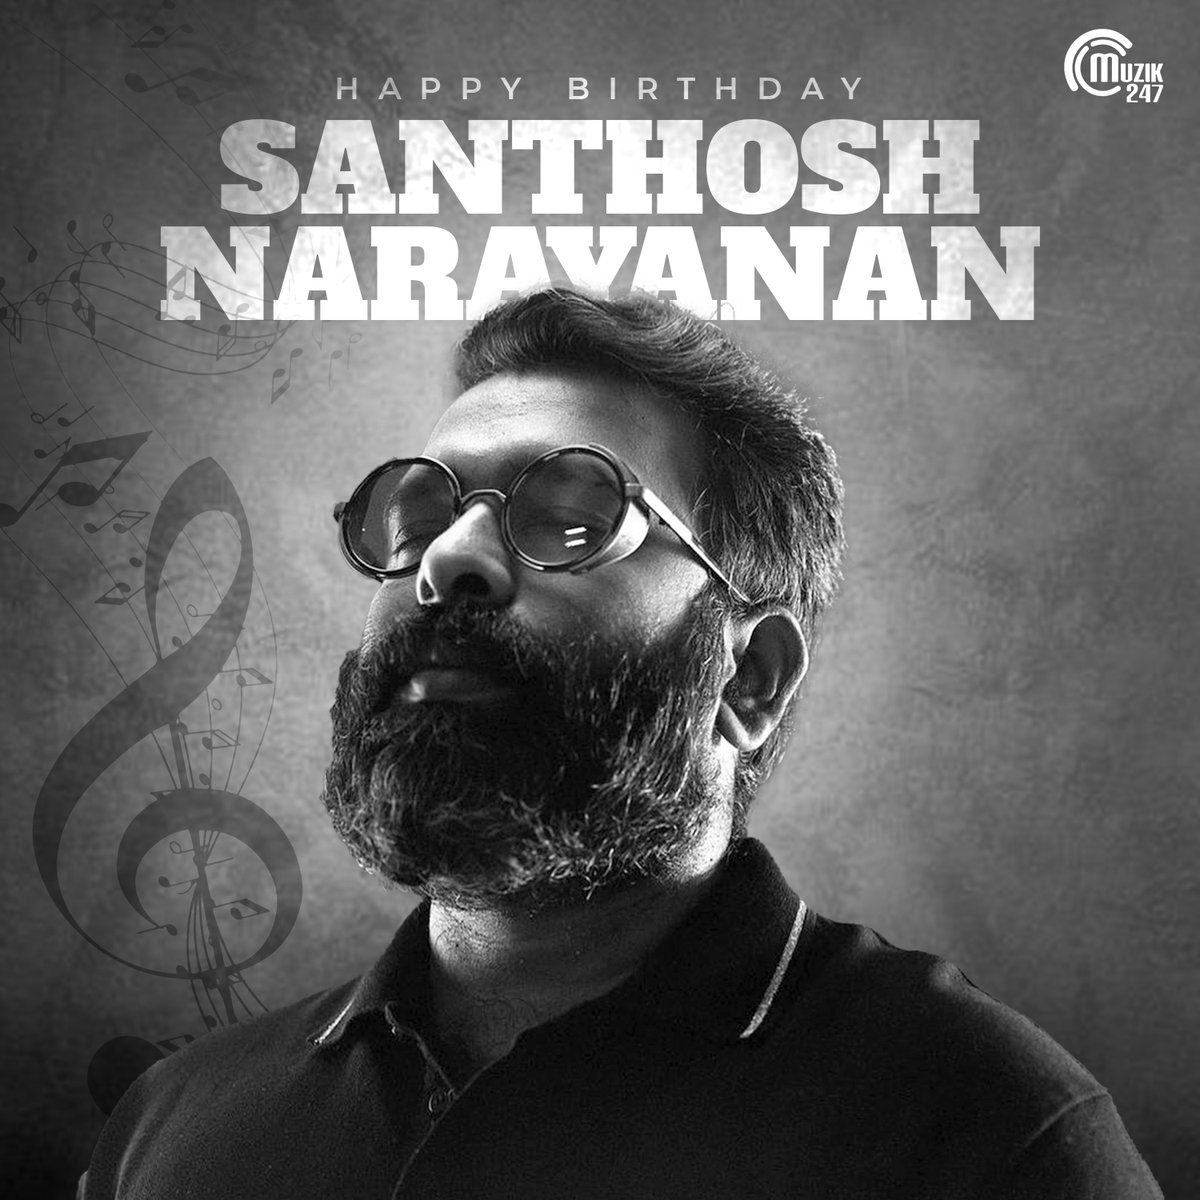 Wishing a very happy birthday to the magician of music @Music_Santhosh ! whose compositions have the power to transport to another world, emotions come alive through note. Keep reshaping essence of sound and enchant us with your talent!🎵🎉 #HBDSanthoshNarayanan